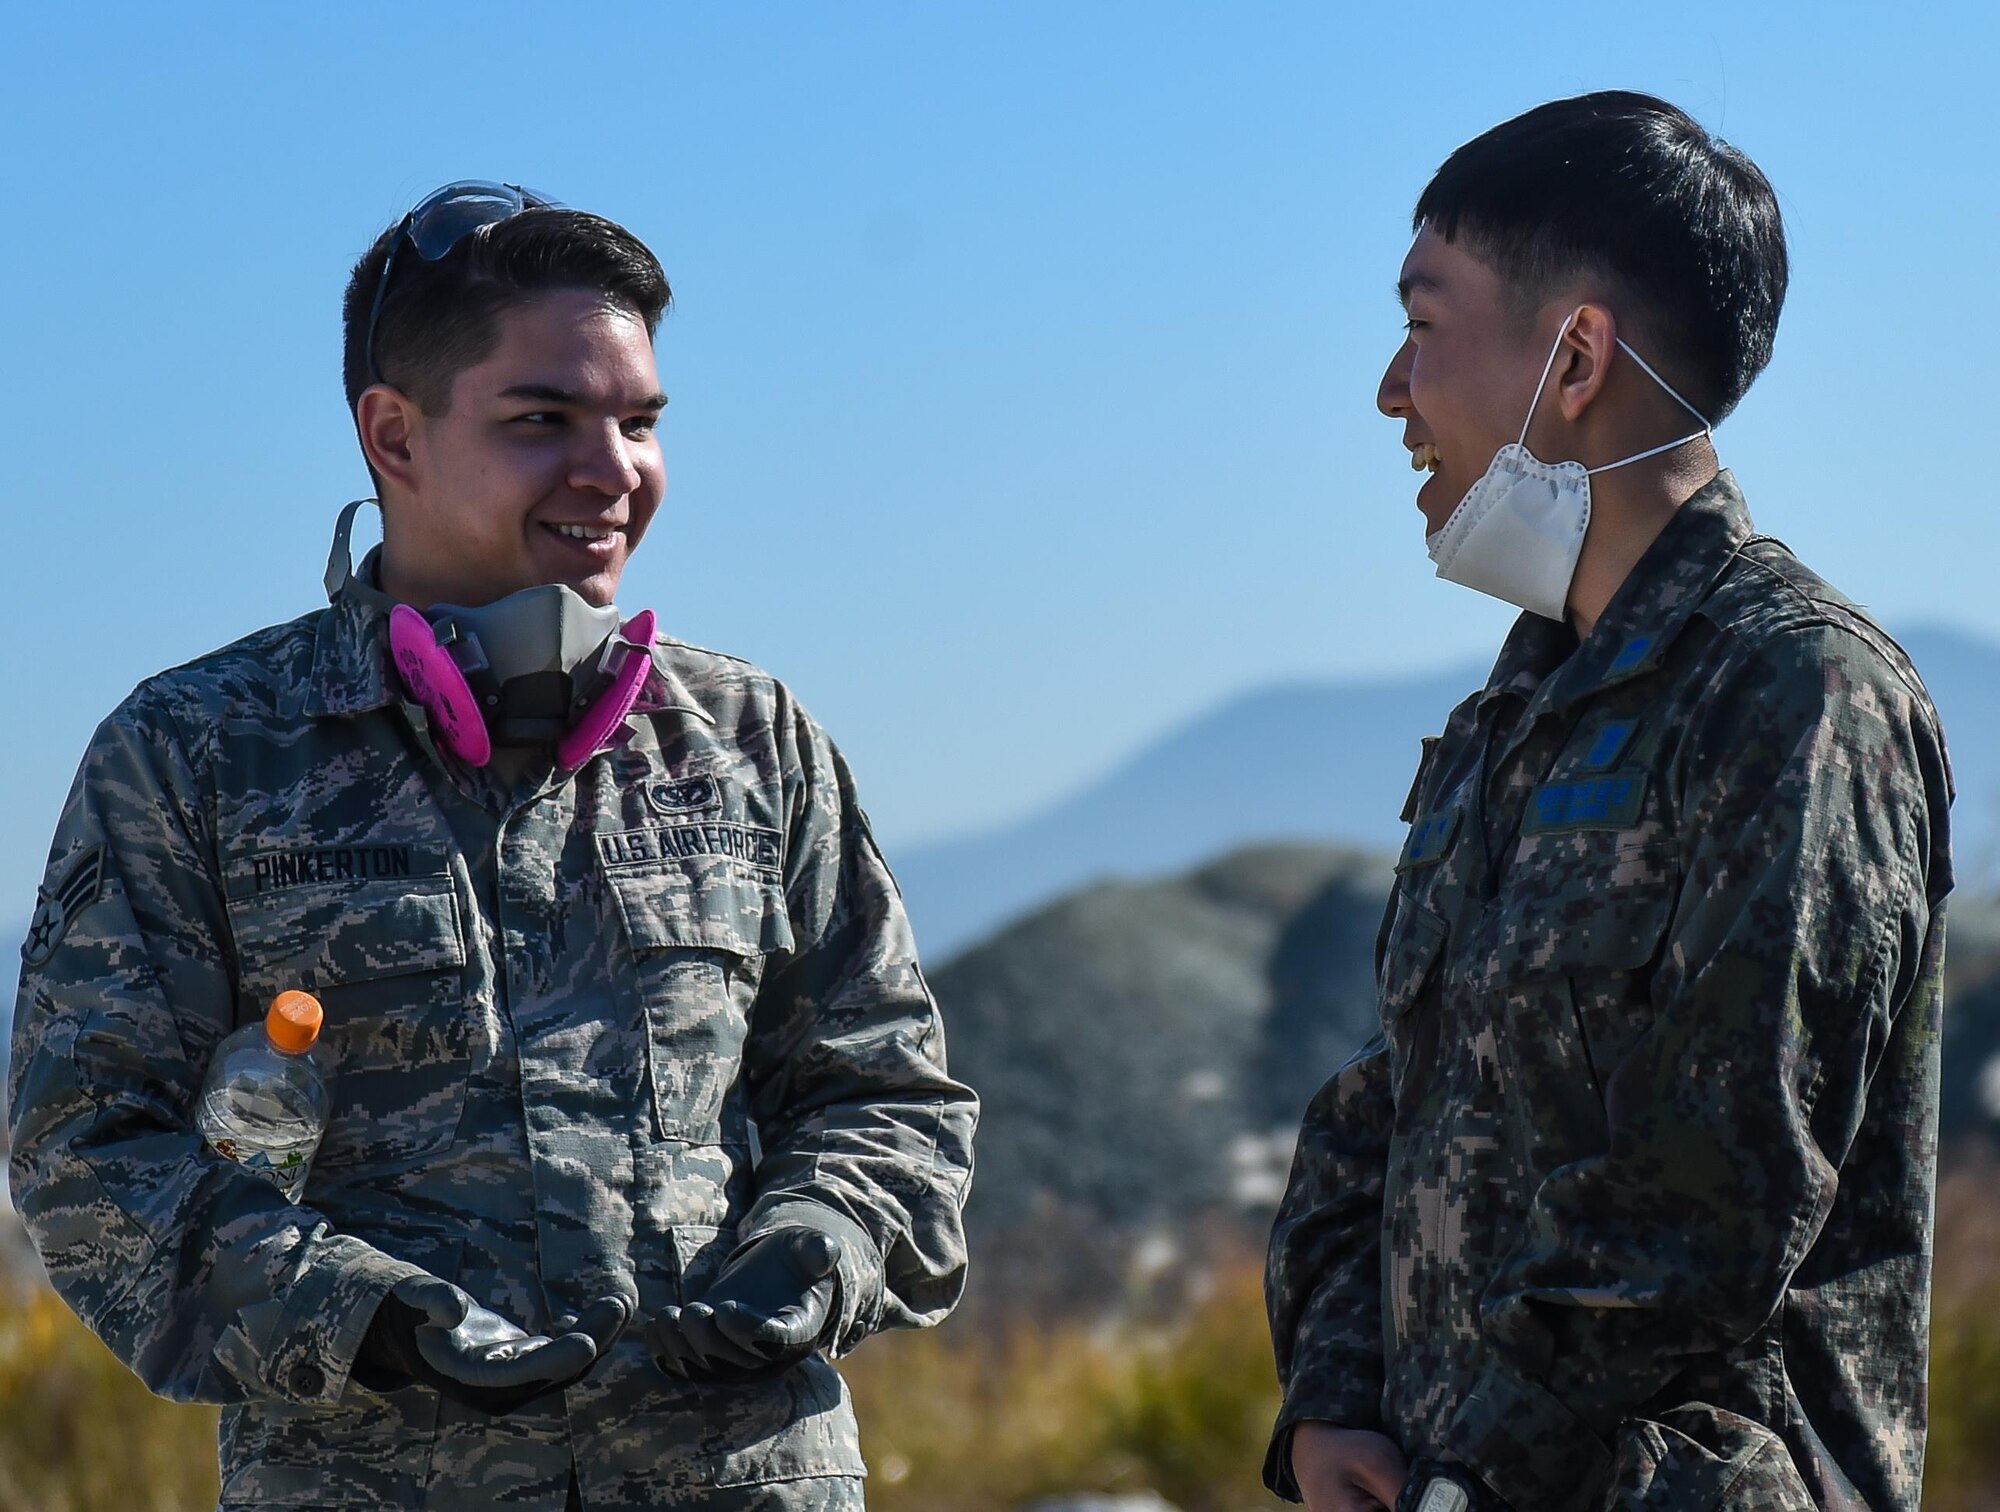 U.S. and Republic of Korea Airmen communicate during a Rapid Airfield Damage Repair bilateral training exercise at Gwangju Air Base, R.O.K., Nov. 9, 2017. U.S. and R.O.K. Airmen trained together for a week to learn the new RADR process, preparing them for response to wartime contingencies, enhancing interoperability and building partnership capacity in the Indo-Asia Pacific region. (U.S. Air Force photo by Senior Airman Curt Beach)